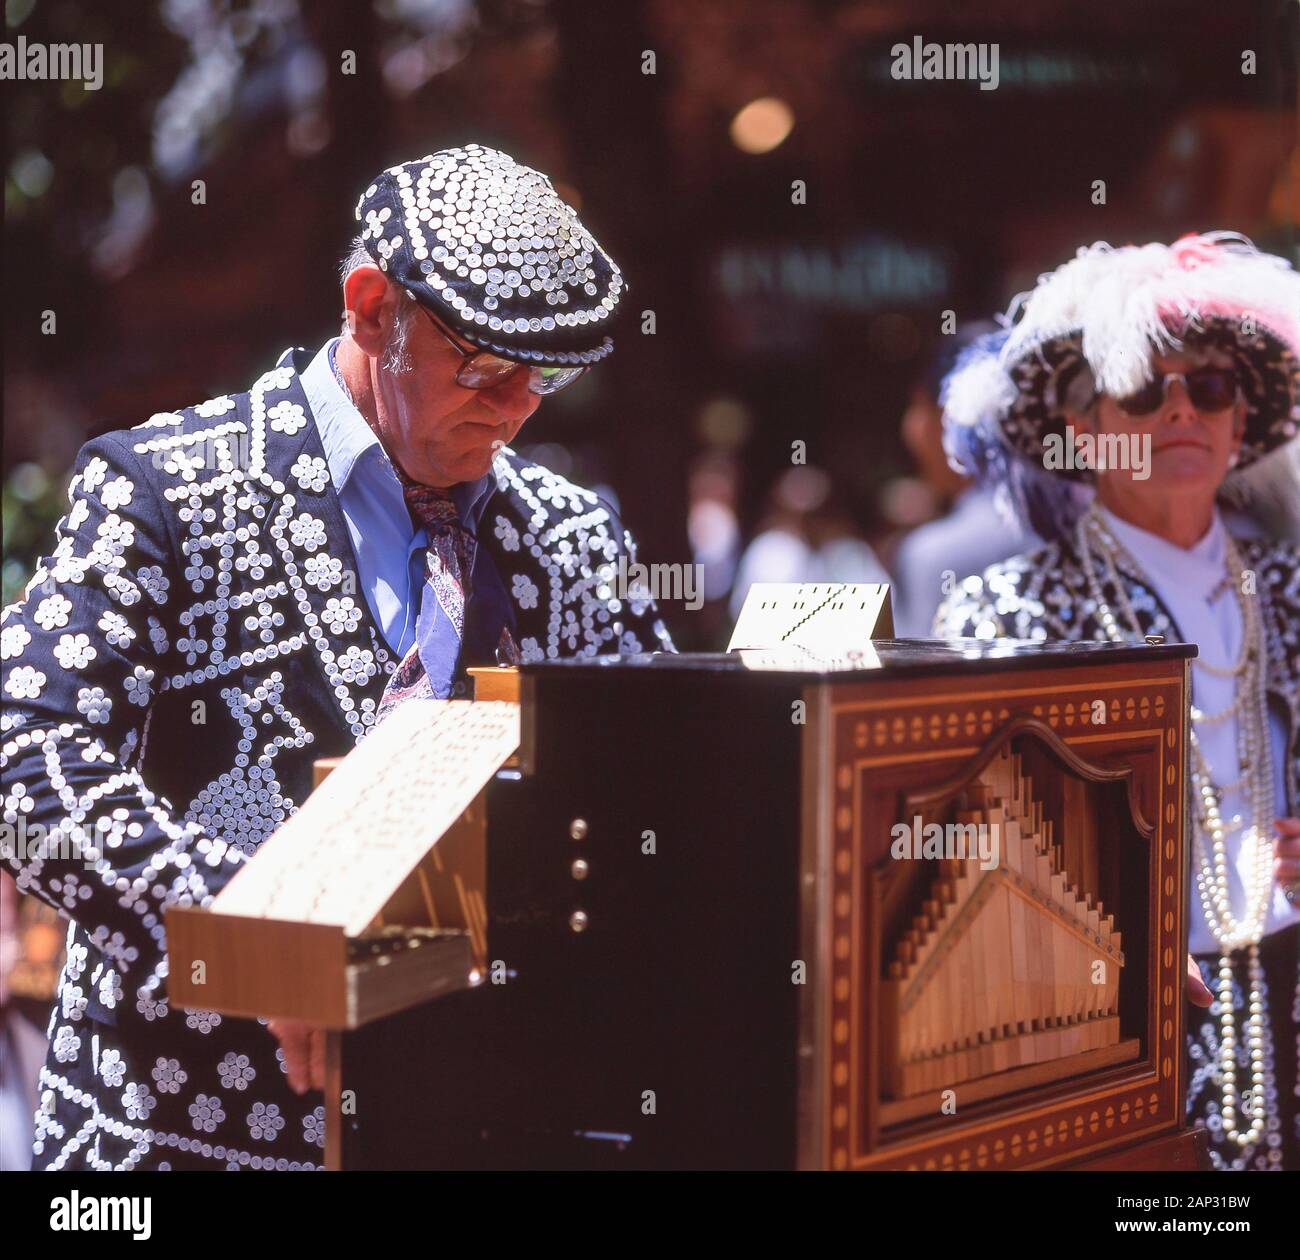 Cockney Capers Pearly King playing Verbeeck organ in street, Collins Street, Melbourne, Victoria, Australia Stock Photo